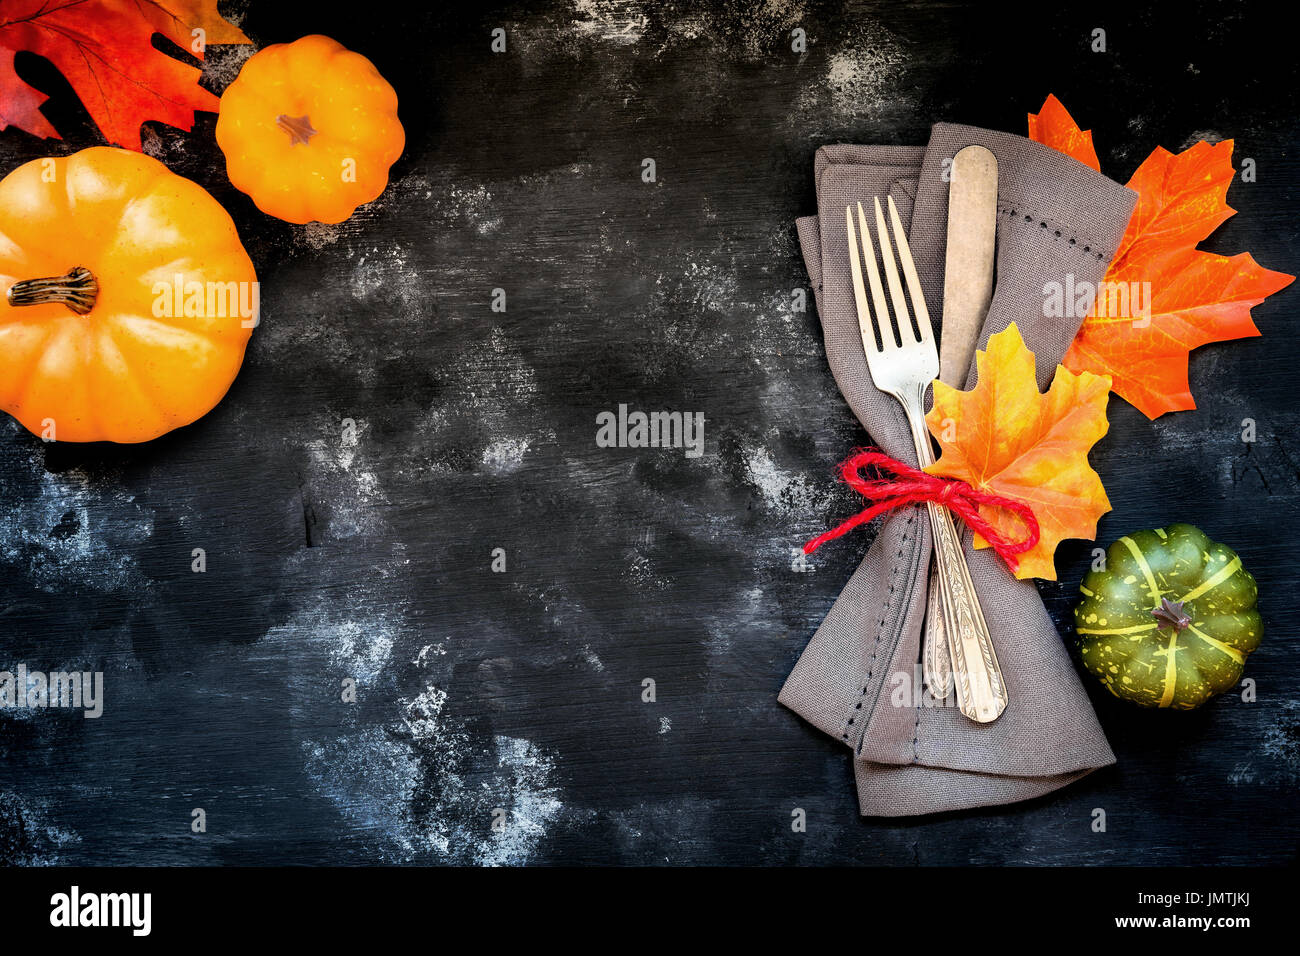 Autumn menu concept - rustic table place setting with a fork and a knife wrapped in a napkin with fall season decorative leaves and pumpkins with copy Stock Photo